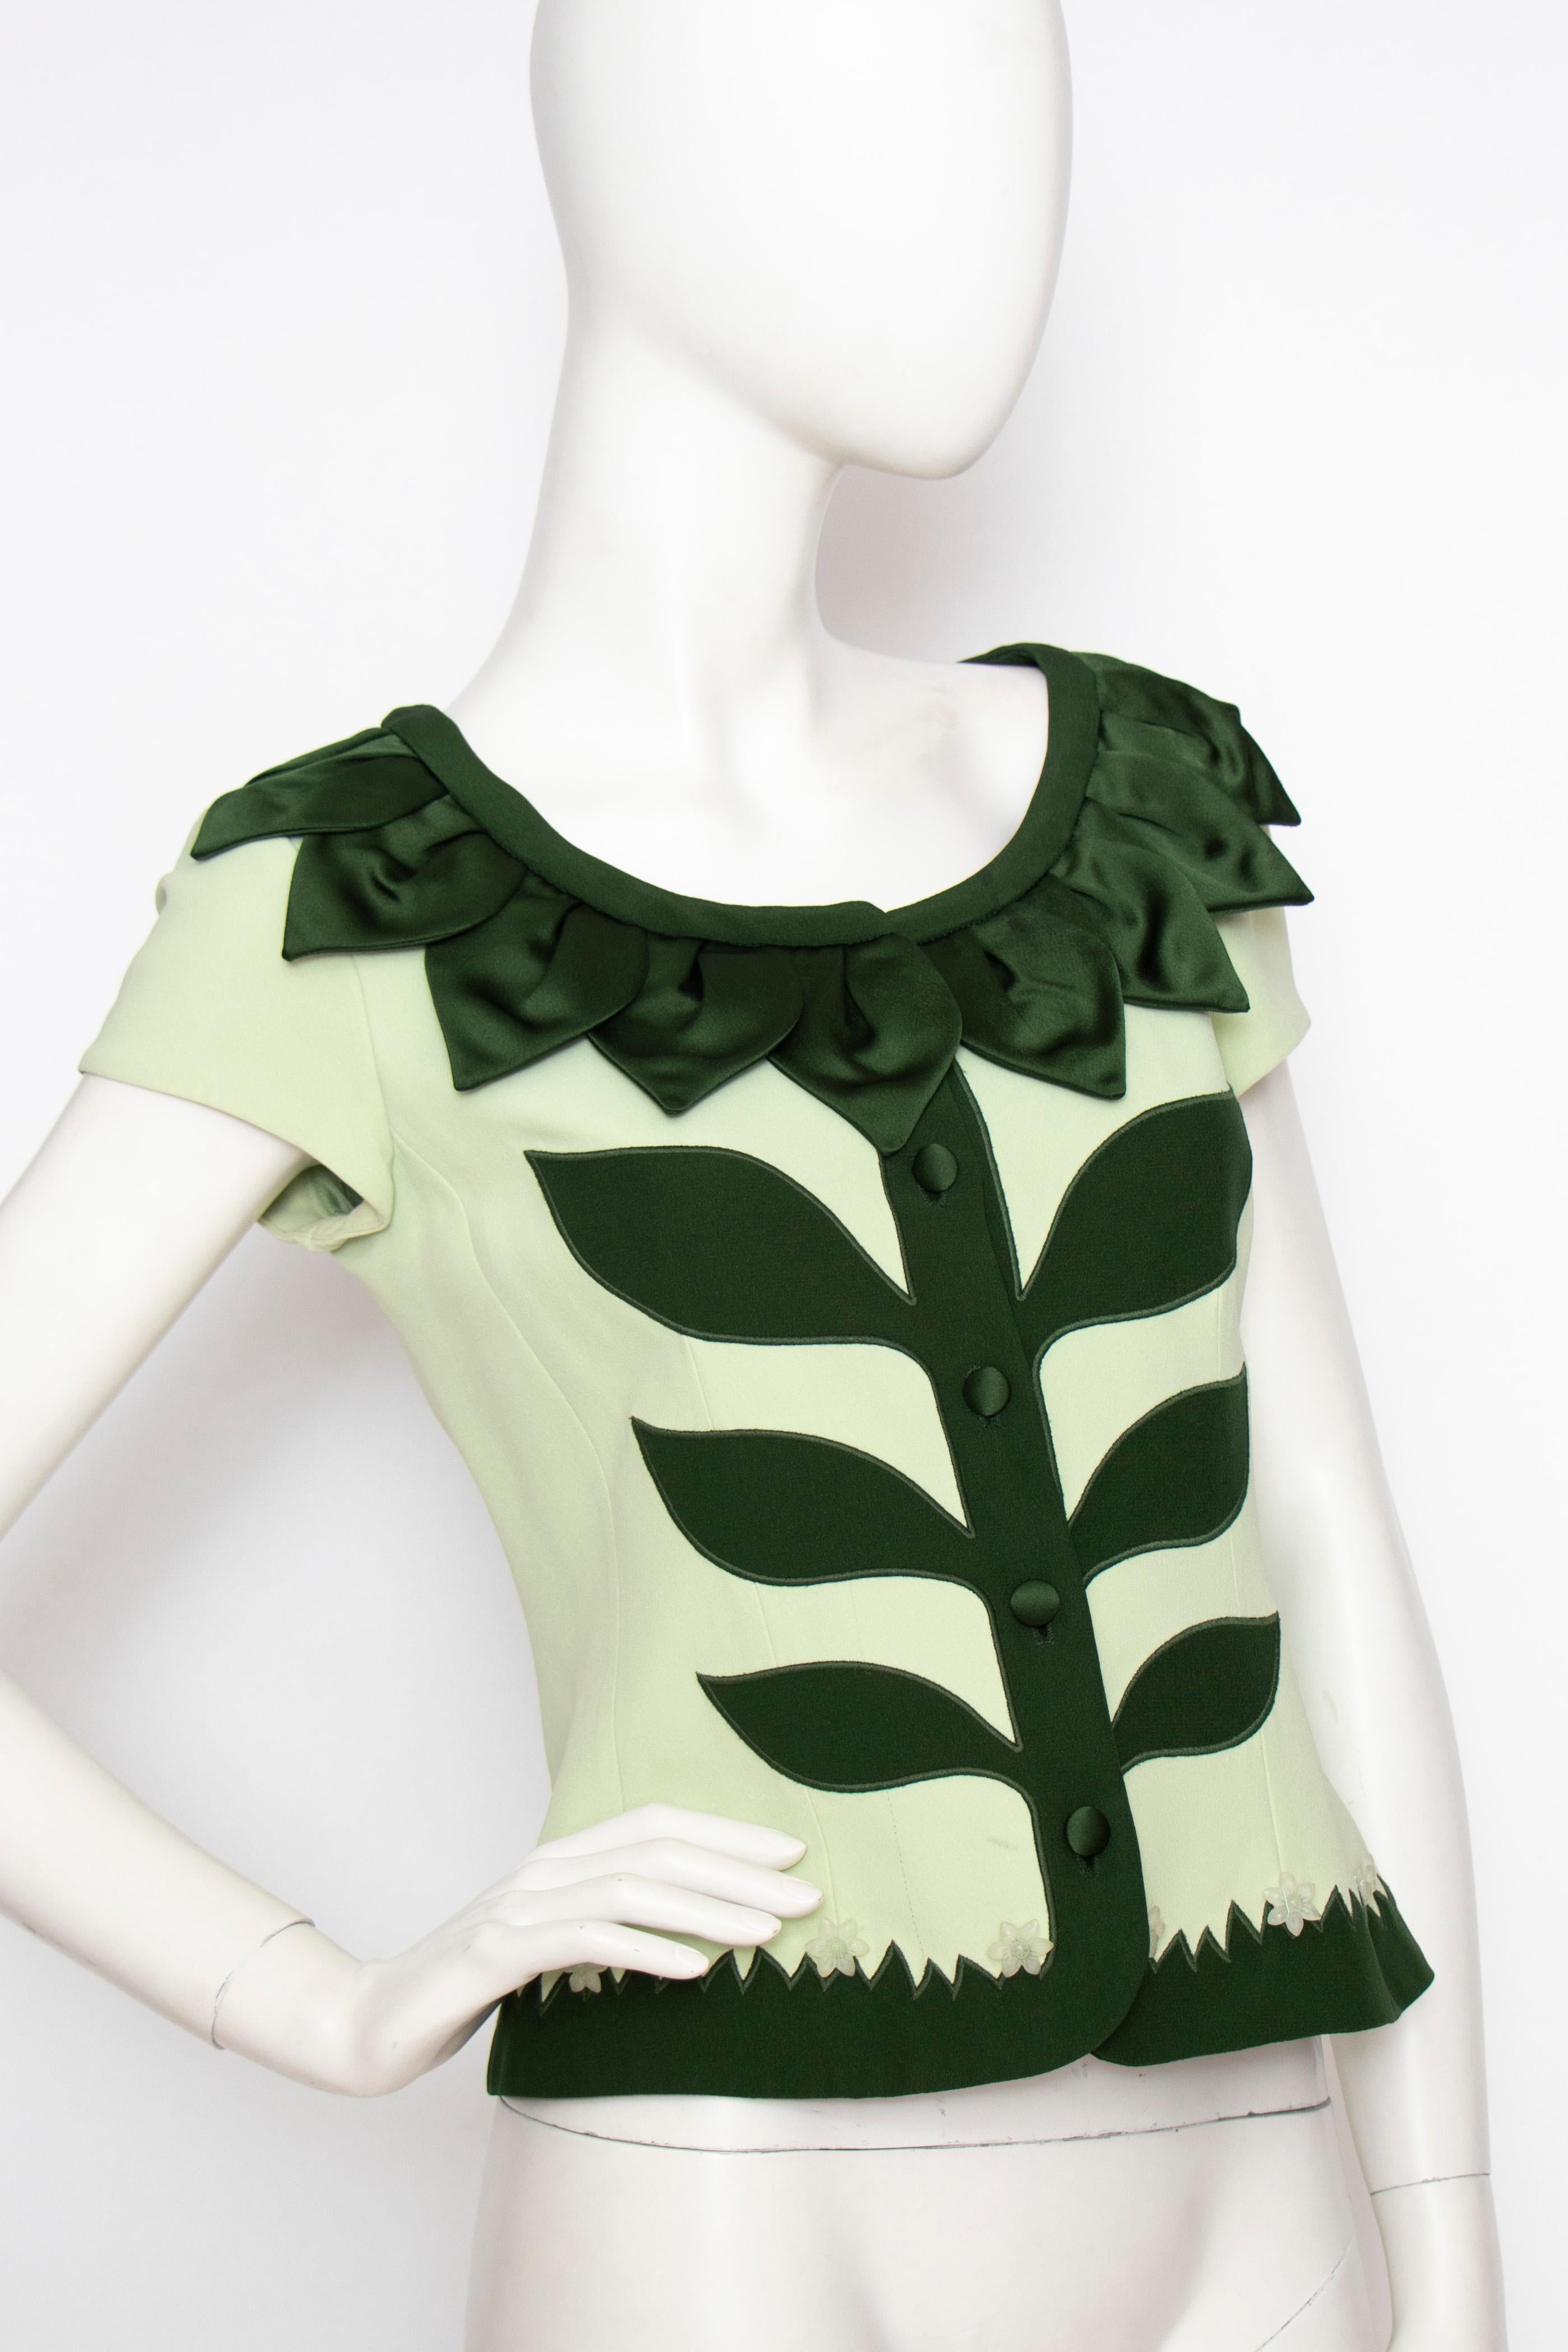 A fun 90s vintage Moschino Cheap and Chic elaborate min green crêpe blouse/jacket with appliquées in forest green, shaping a flower and green field accented with translucent flower buttons.

The size of the garment corresponds to a modern size